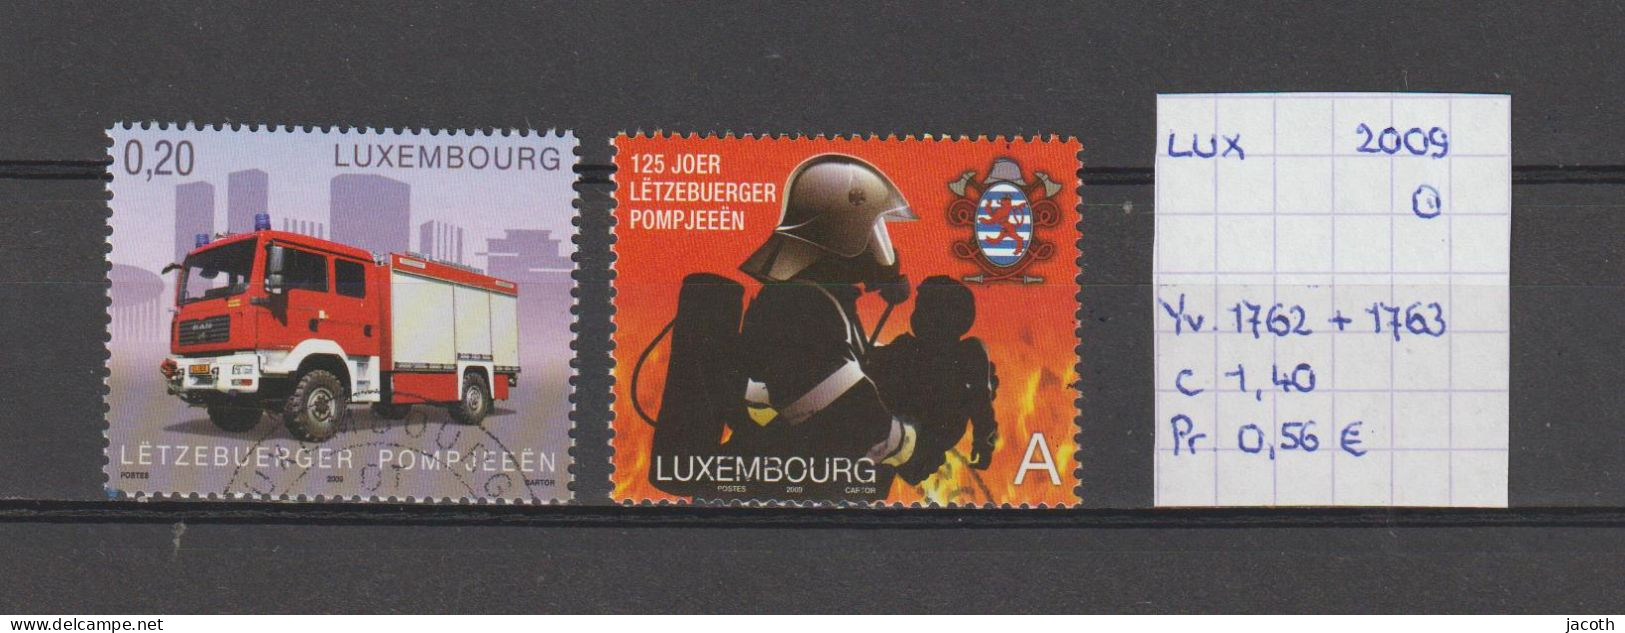 (TJ) Luxembourg 2009 - YT 1762 + 1763 (gest./obl./used) - Used Stamps